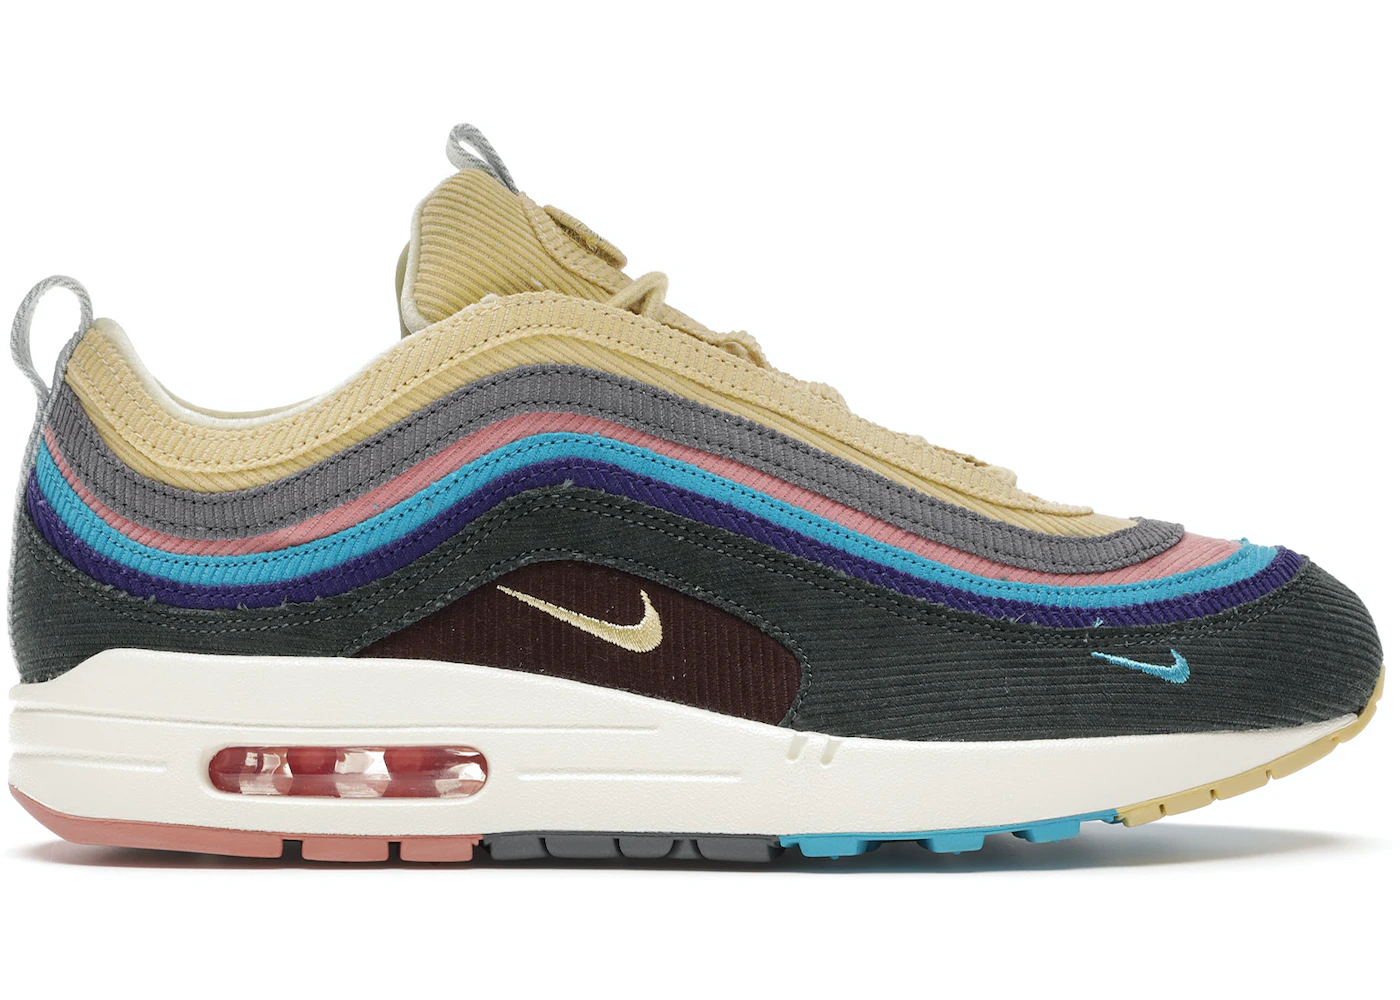 Nike Air Max Sean Wotherspoon Accessories and Dustbag) - AJ4219-400 -